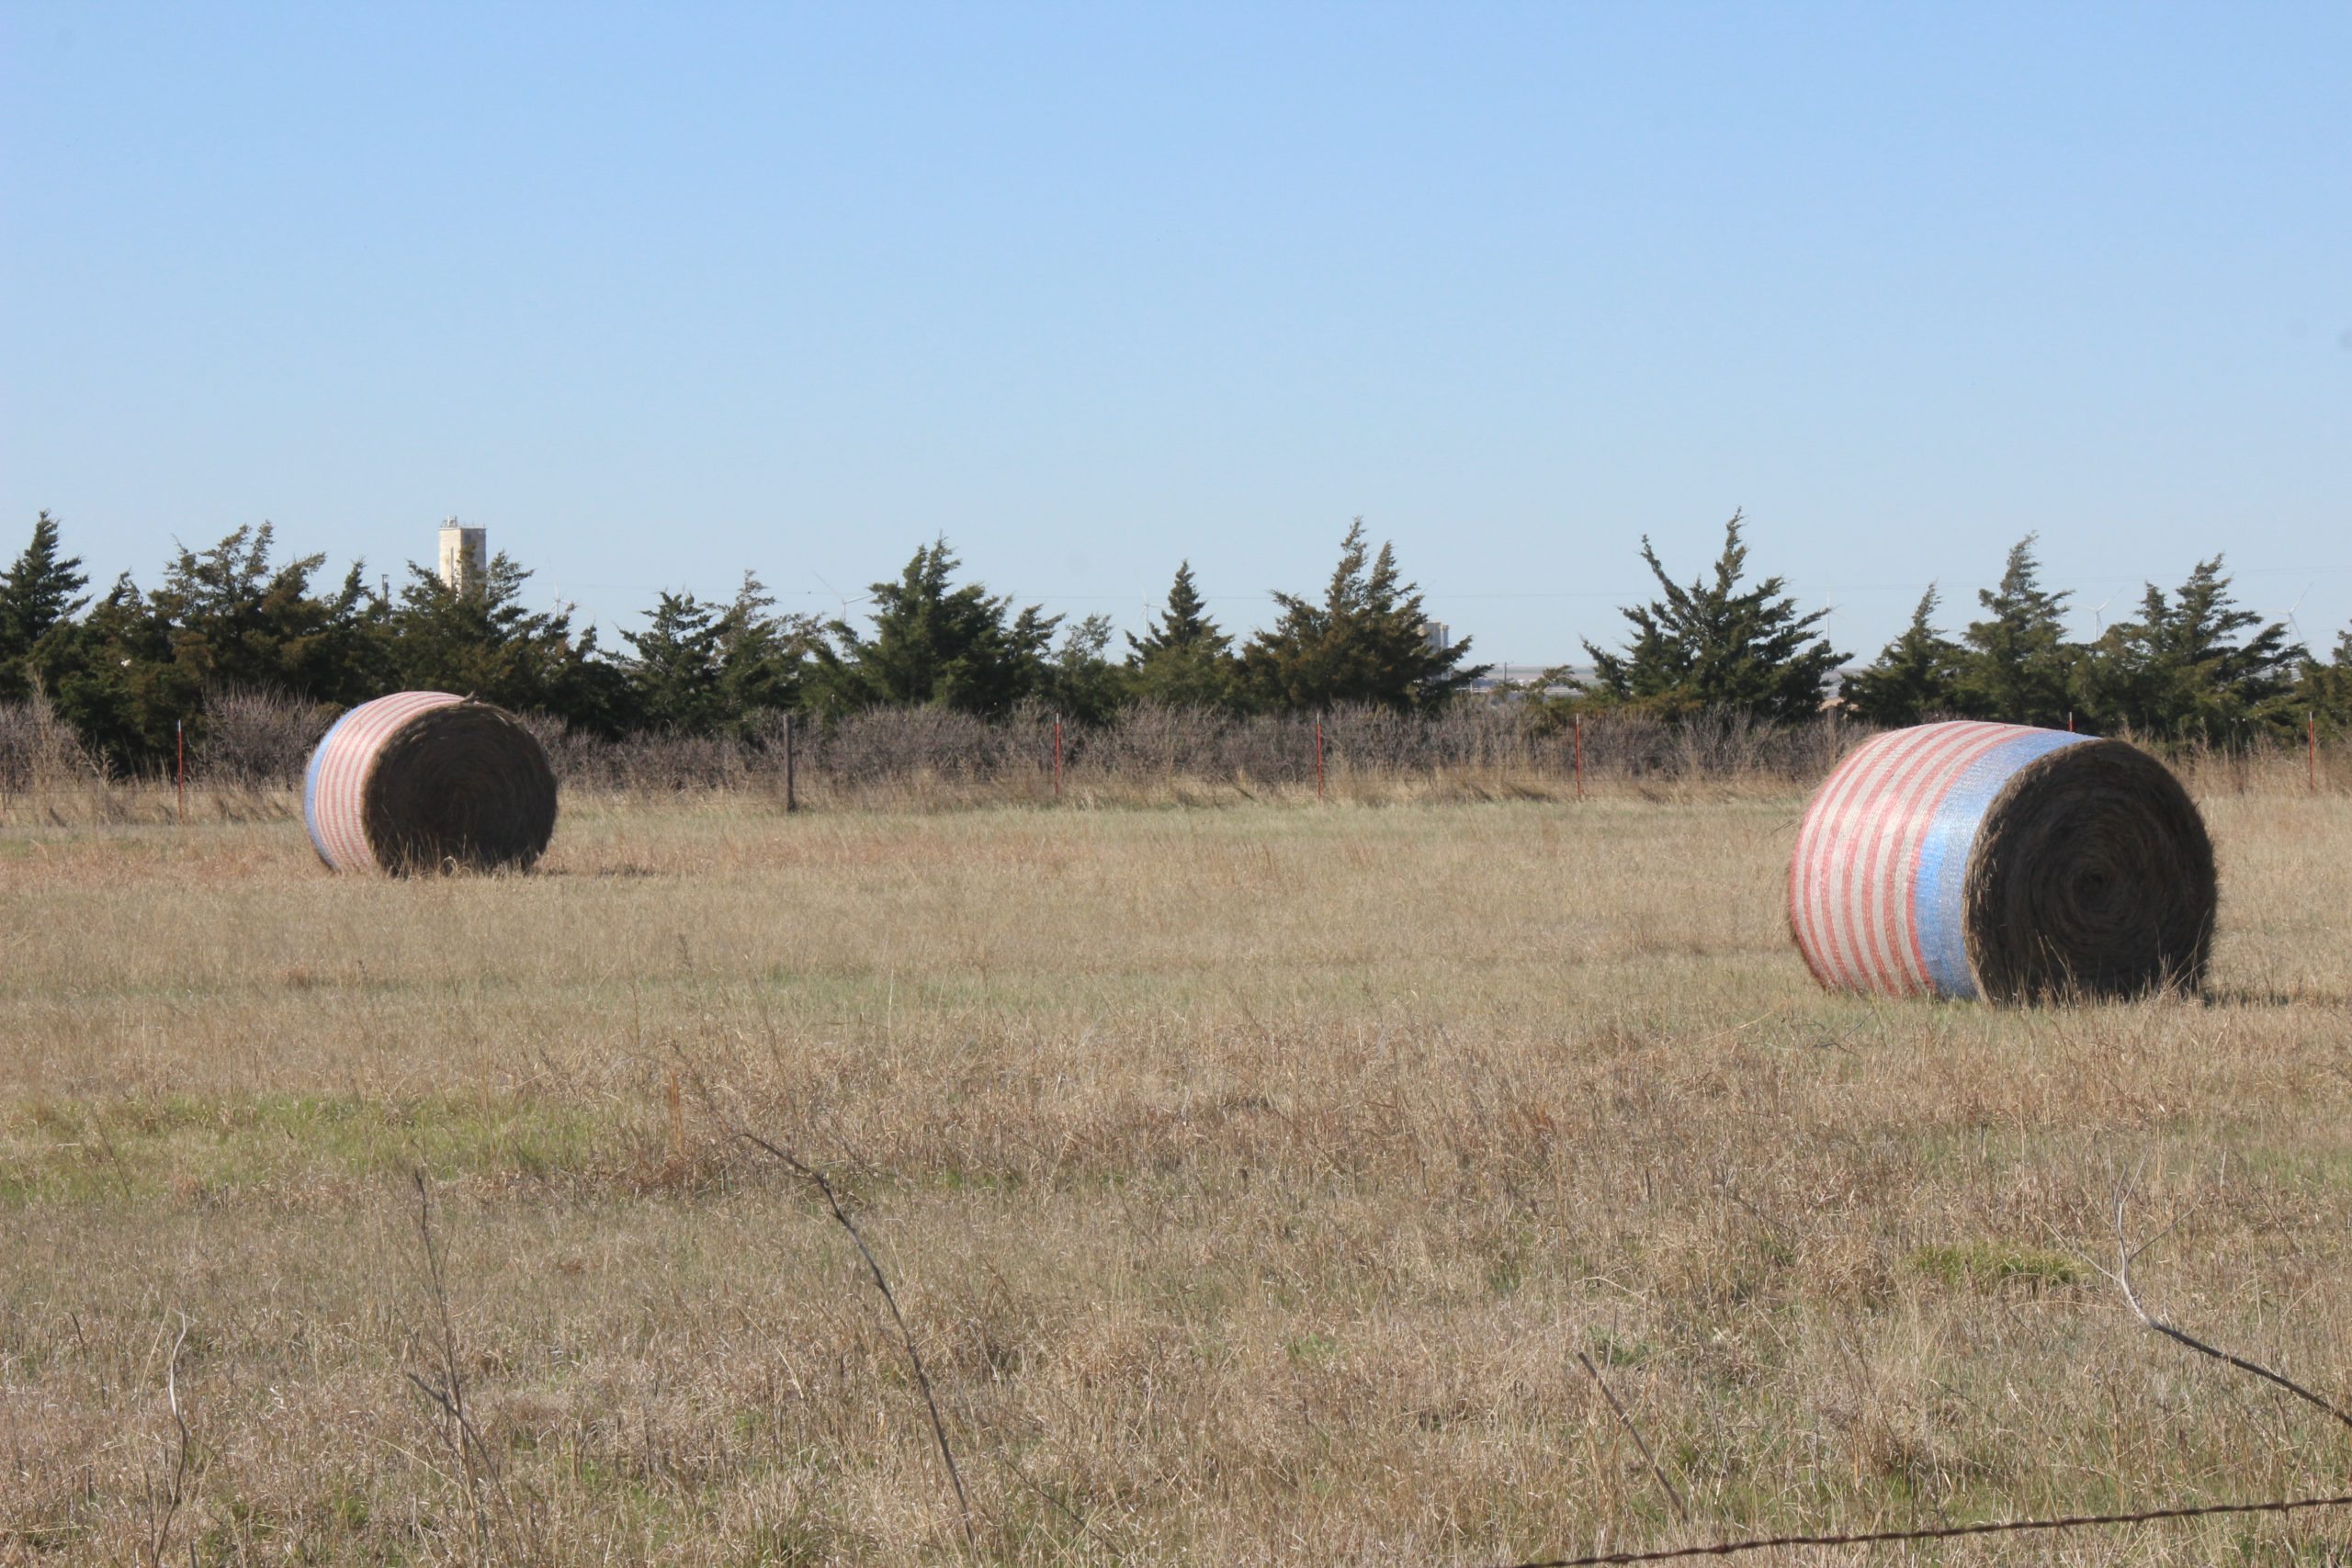 Large round bales in a field near Dodge City, Kansas. (Journal photo by Dave Bergmeier.)